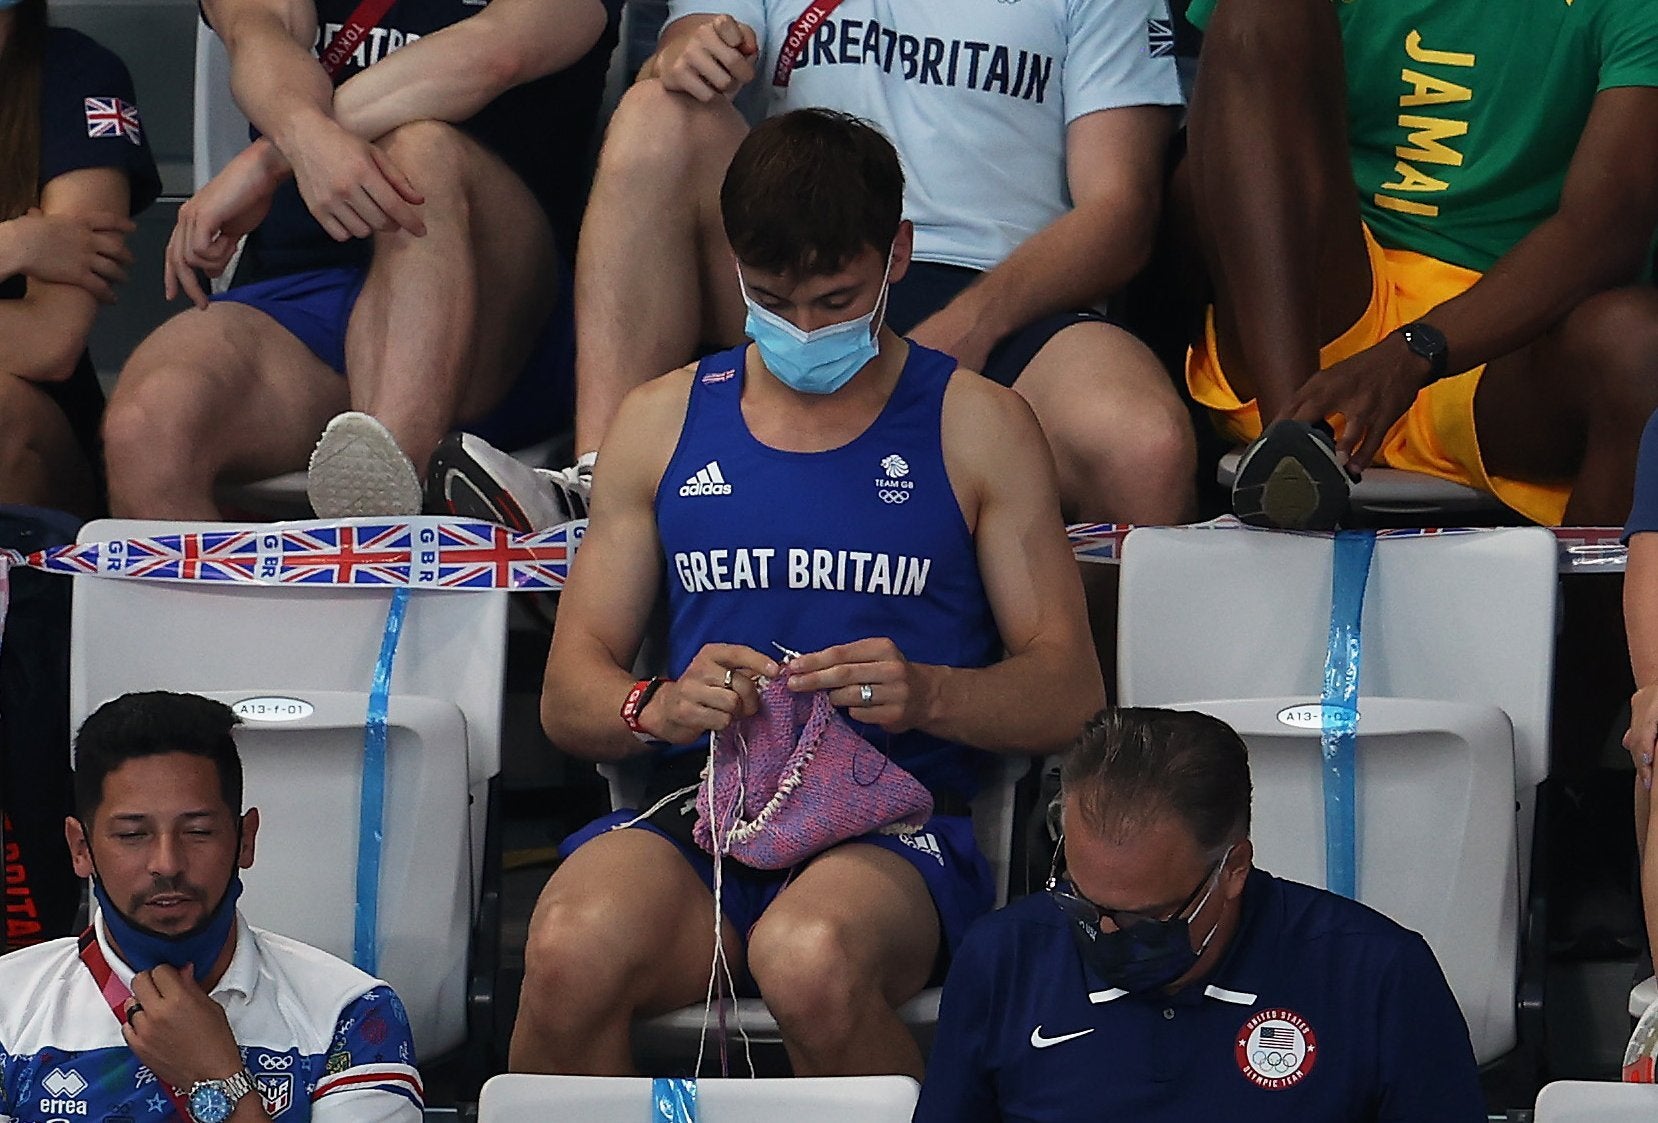 tom daley knitting during olympics final